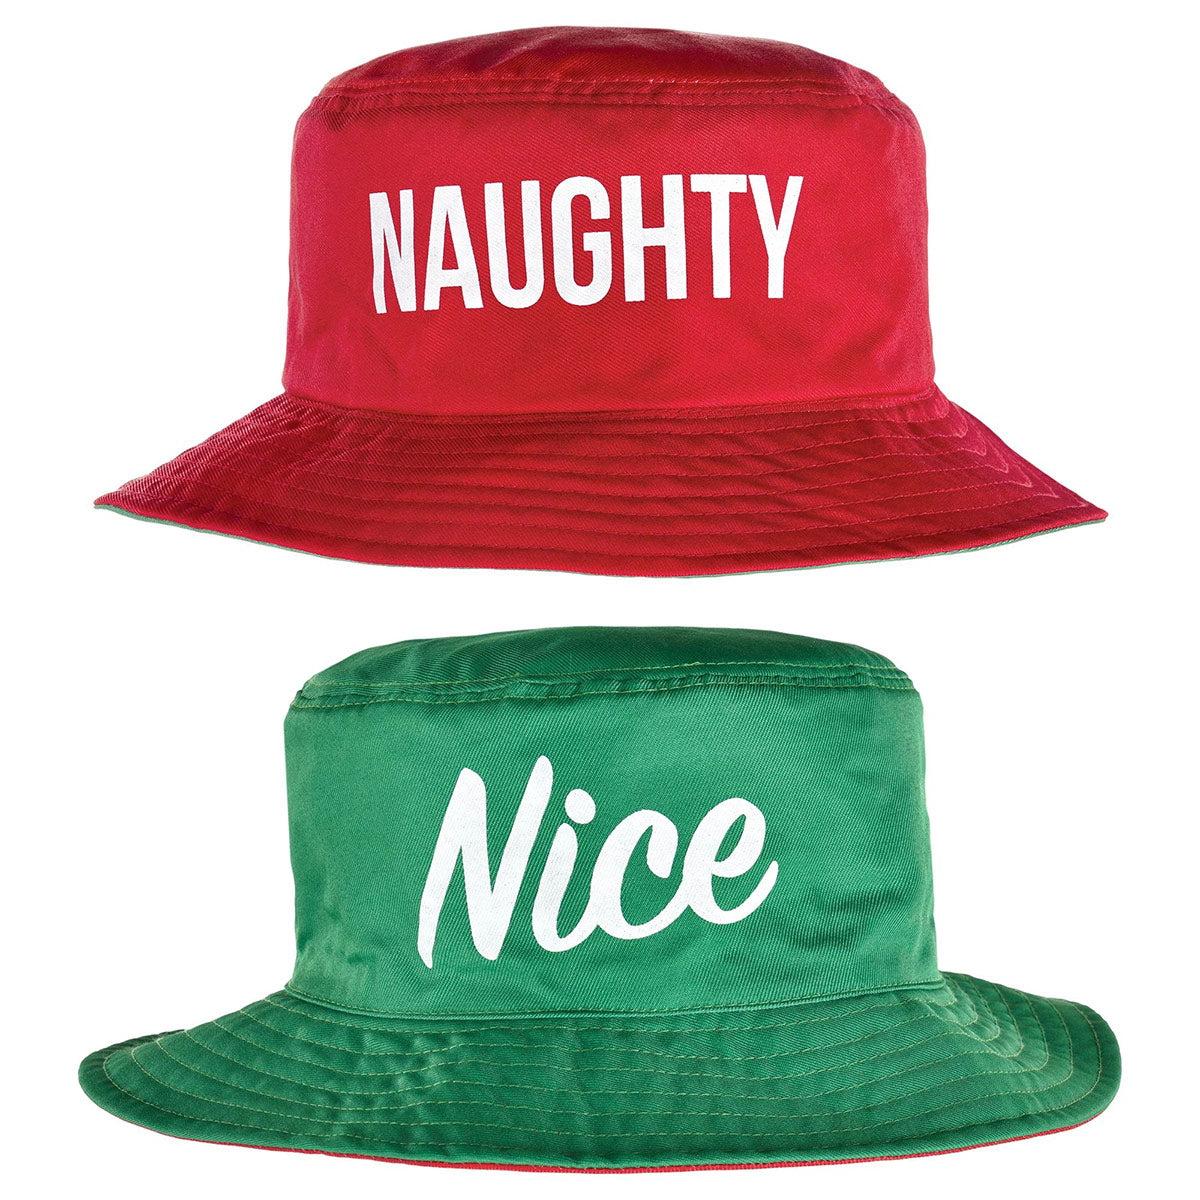 BEISTLE COMPANY Christmas Reversible Bucket Hat Naughty and Nice, Red and Green